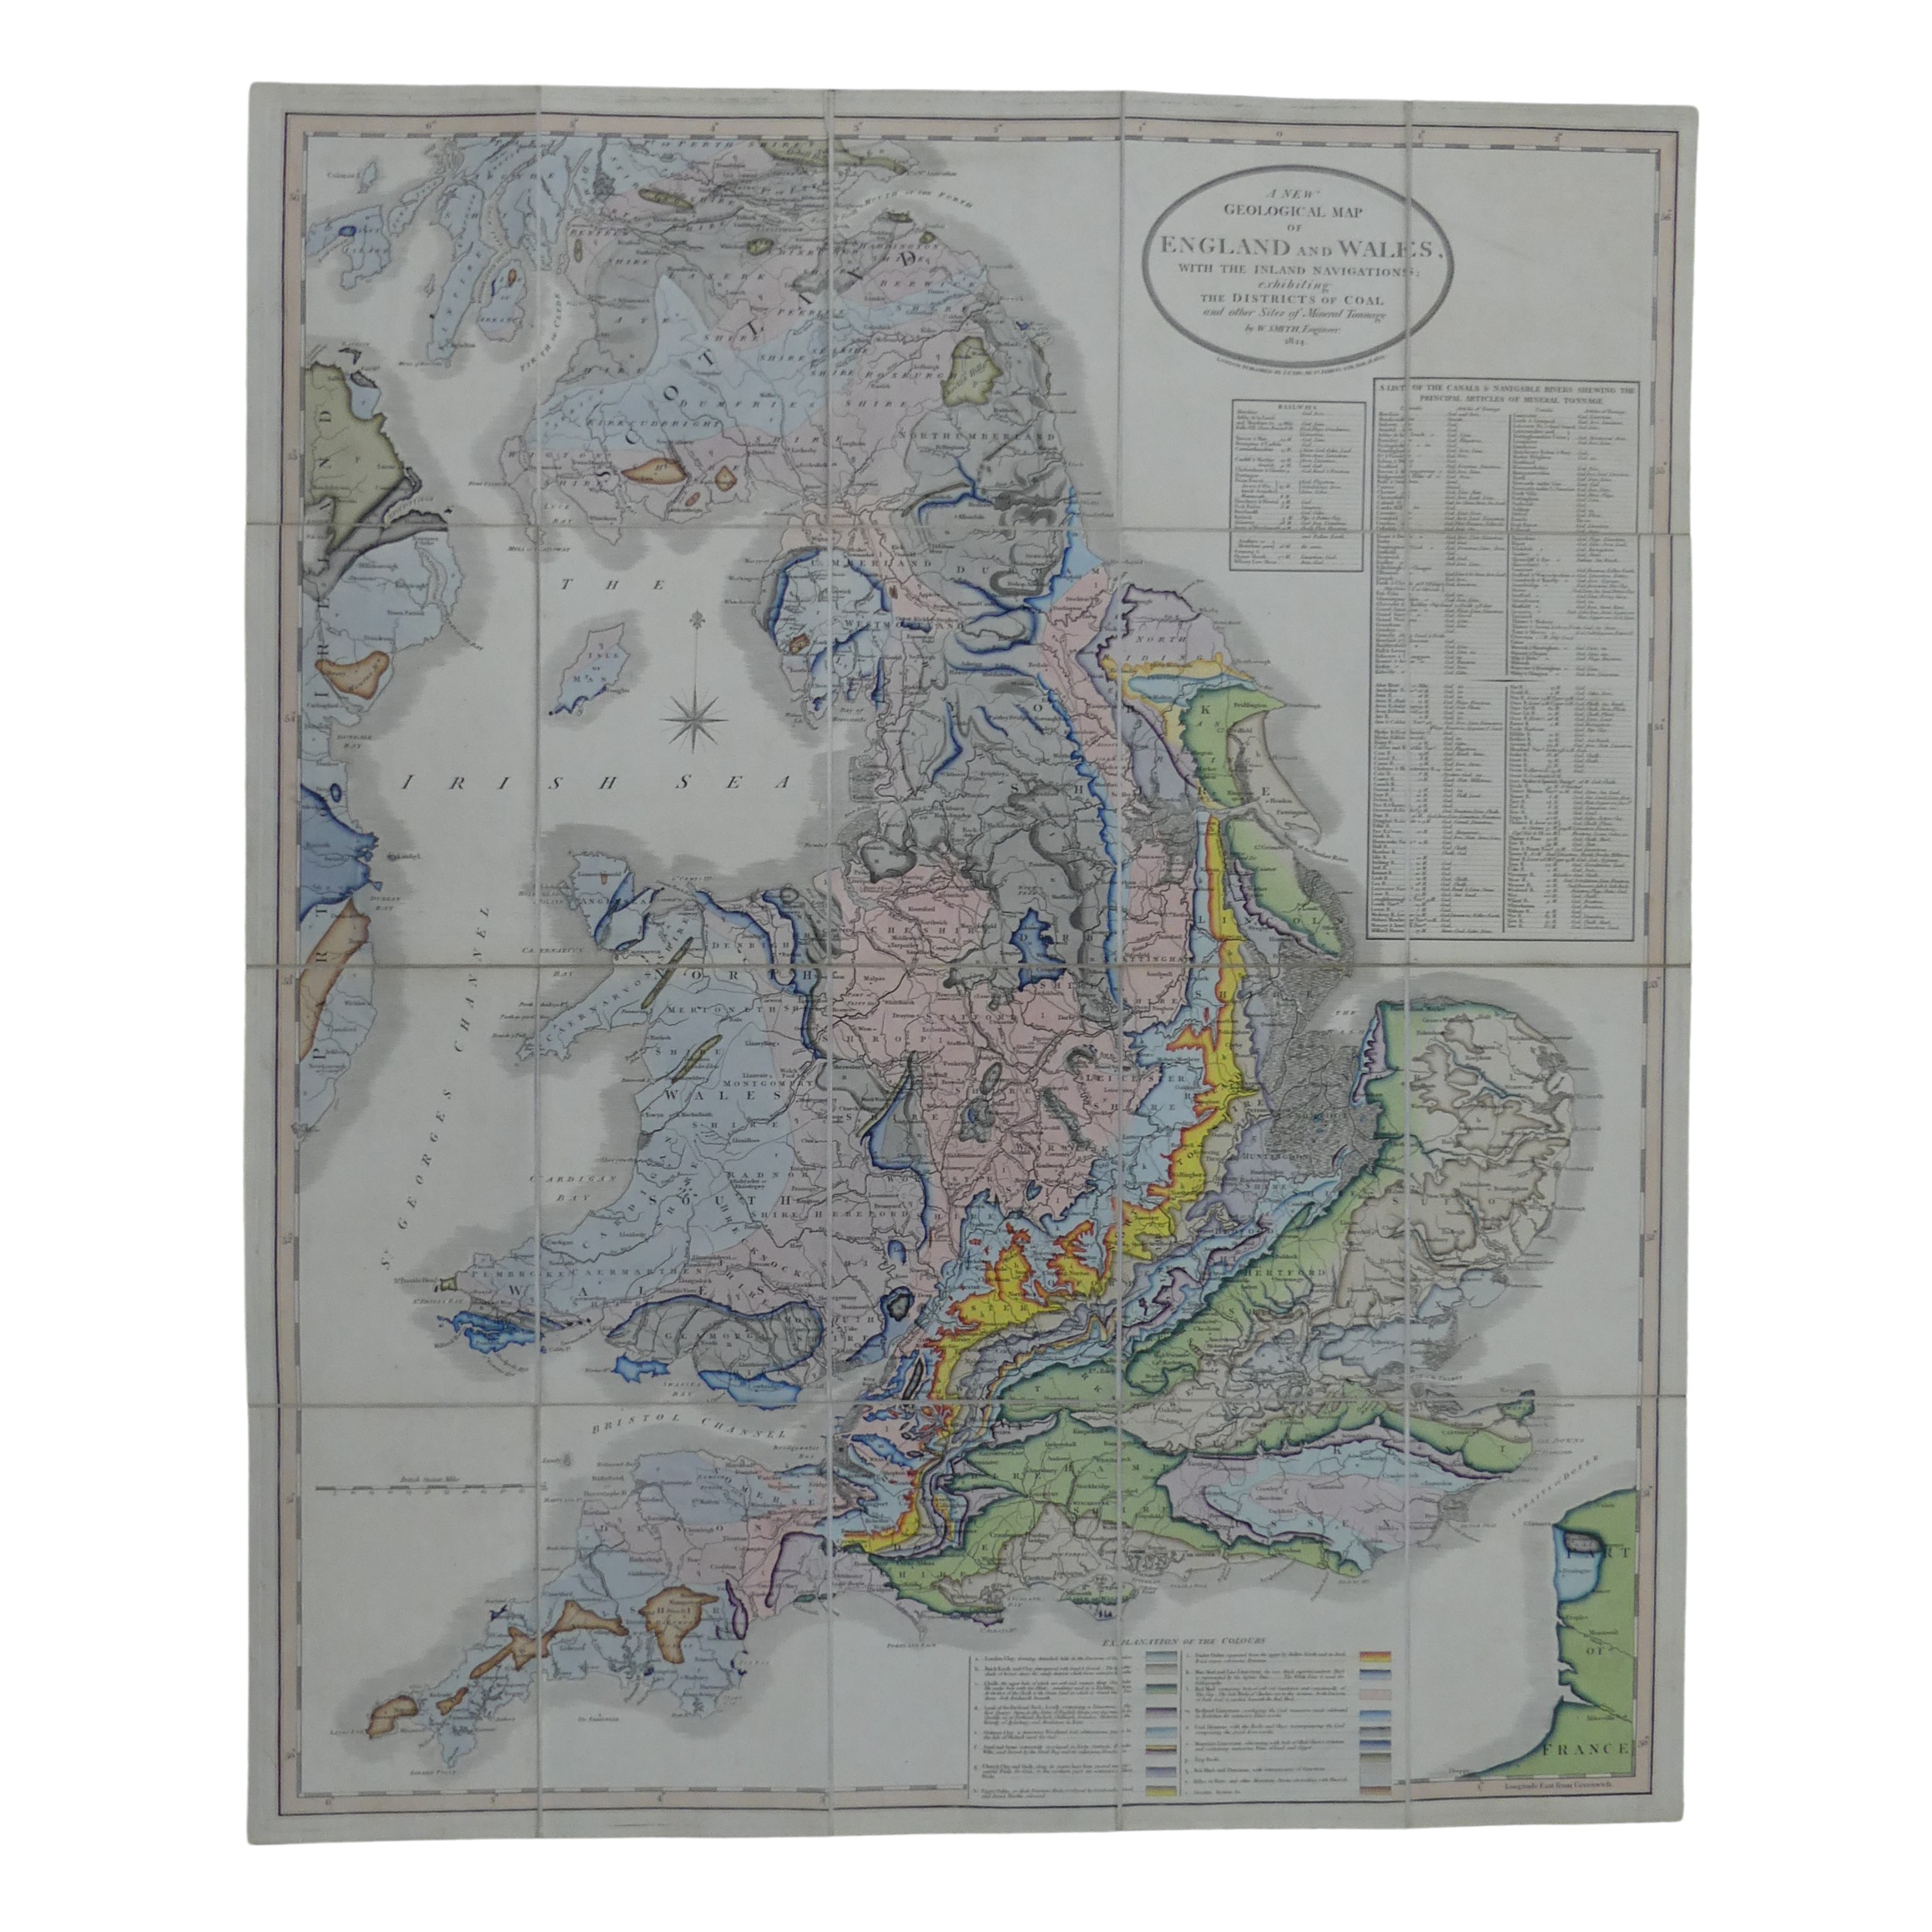 Geology; Smith (William) 'A New Geological Map of England and Wales with the Inland Navigations